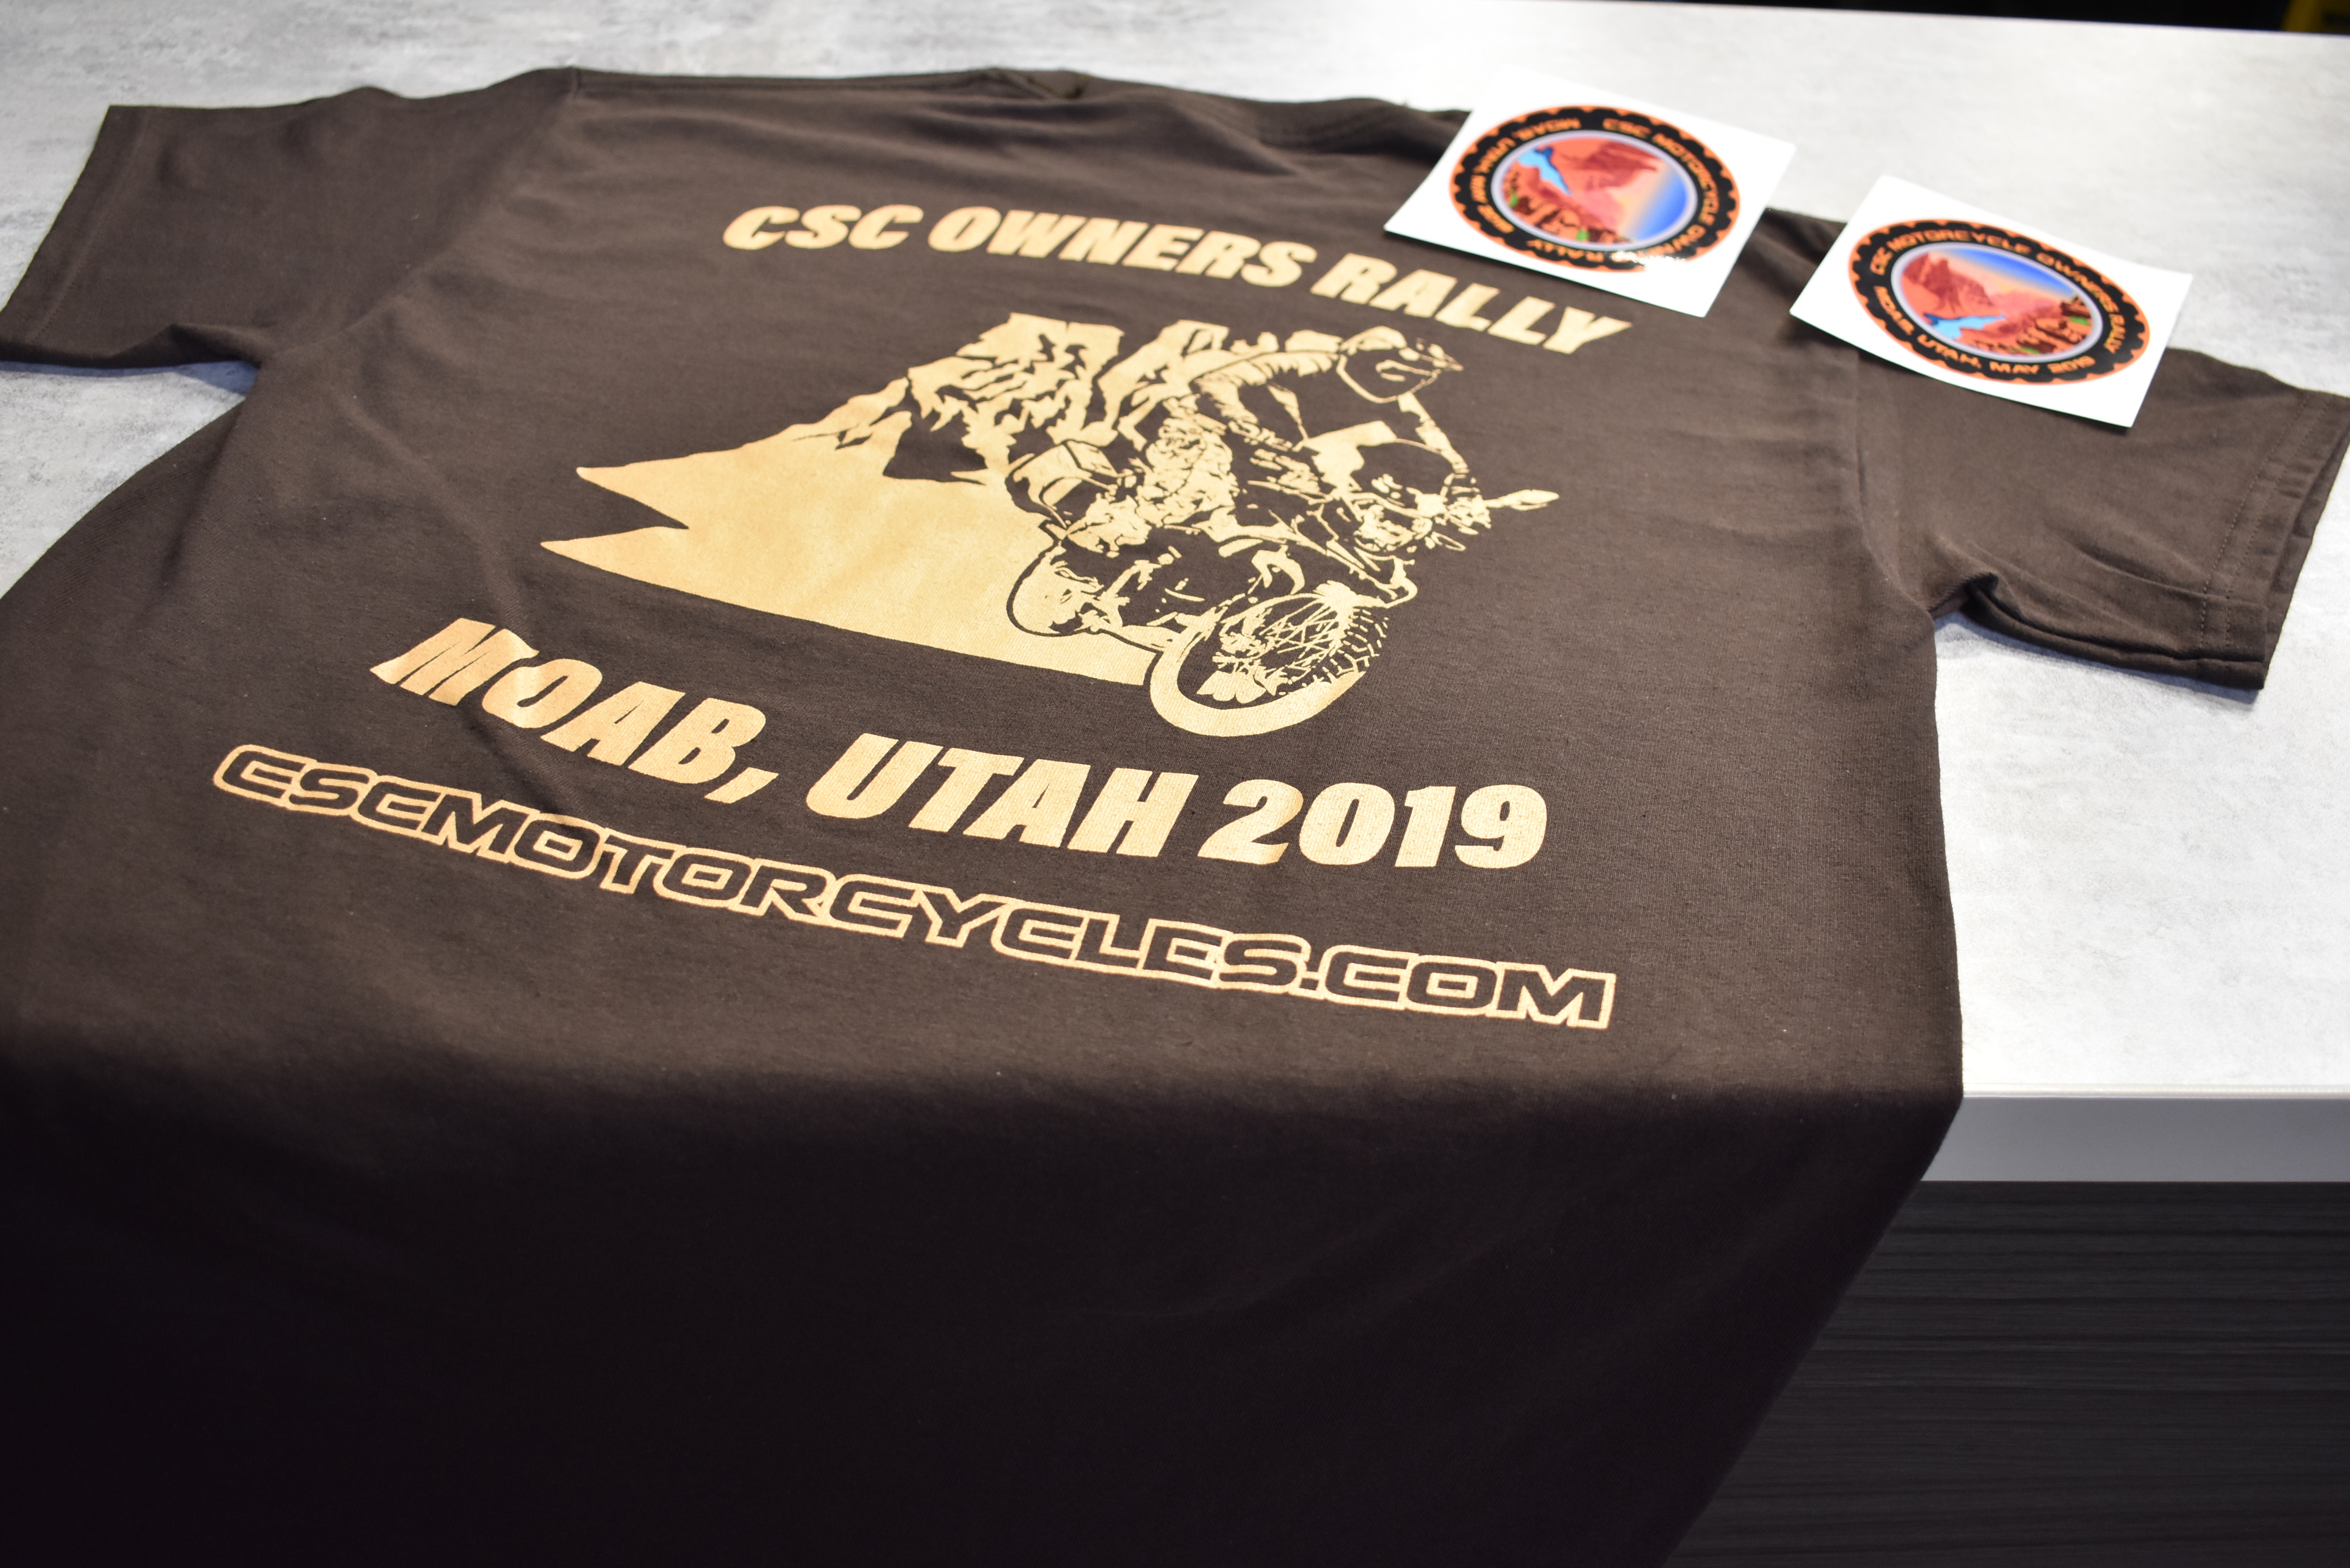 CSC Motorcycles Owner's Rally! Moab, Utah 2019 May 22, 23, & 24 Event T-Shirt in Brown.